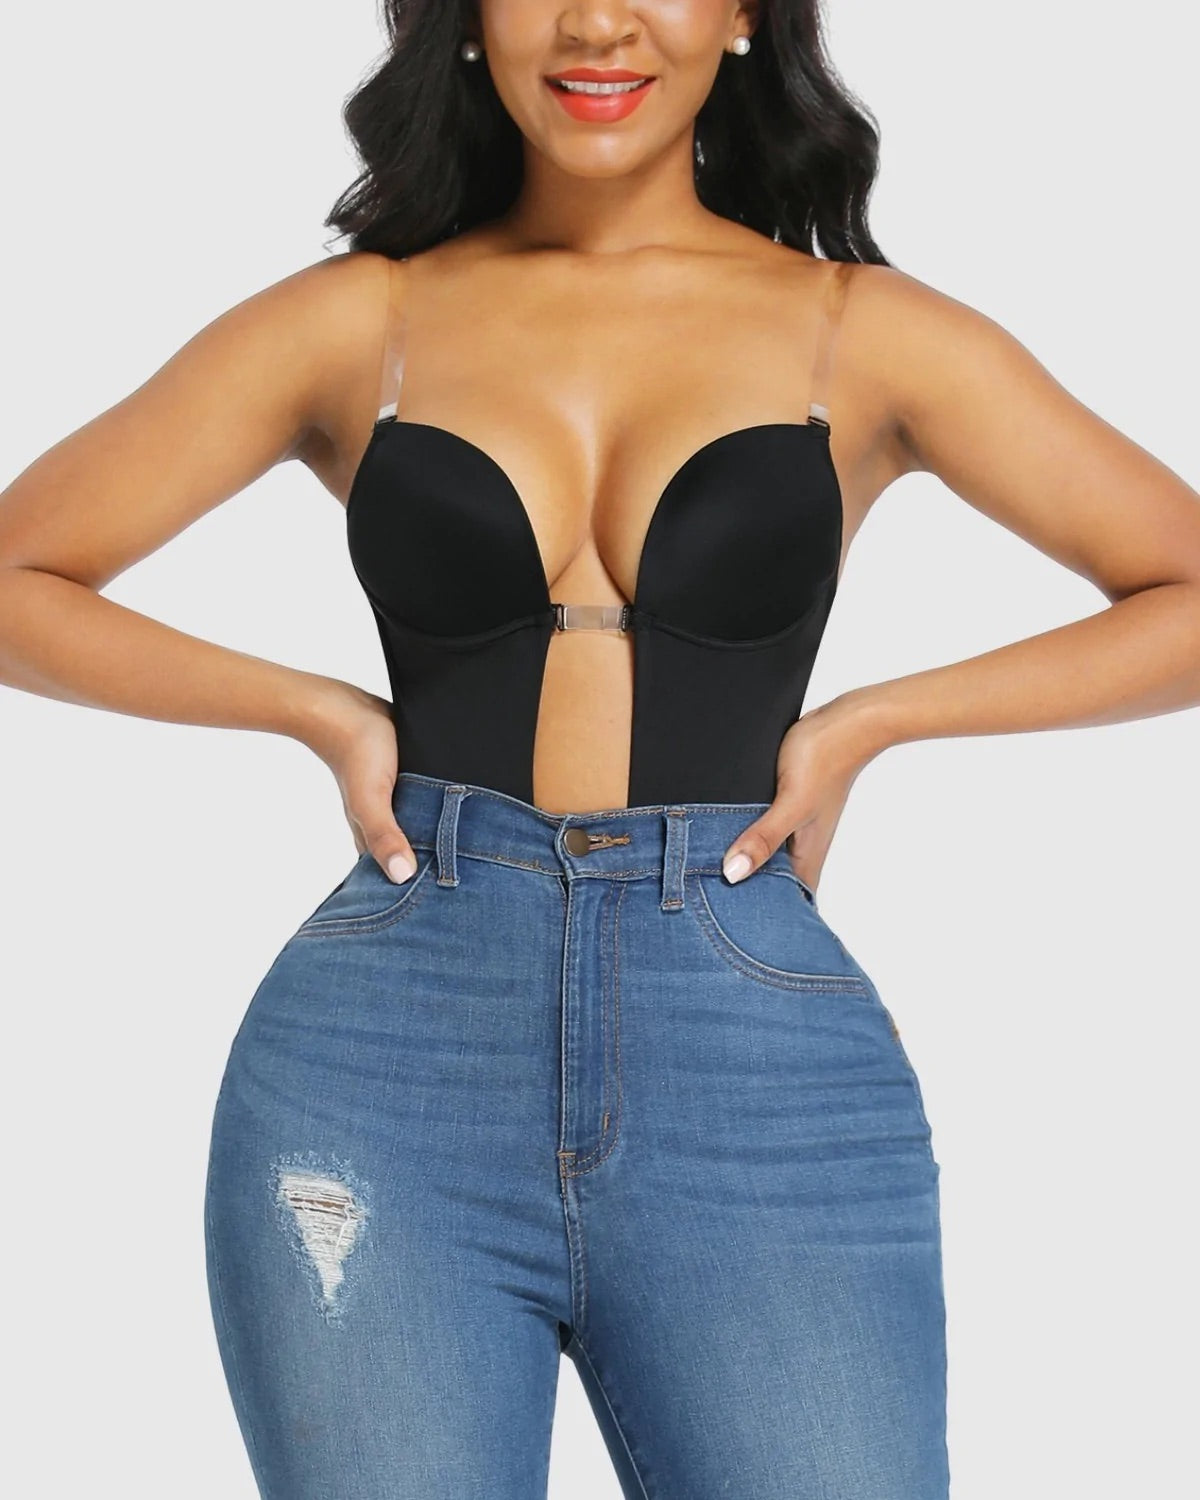 Buy ECOSWAY Women Plunging Deep V-Neck Strapless Backless Bodysuit